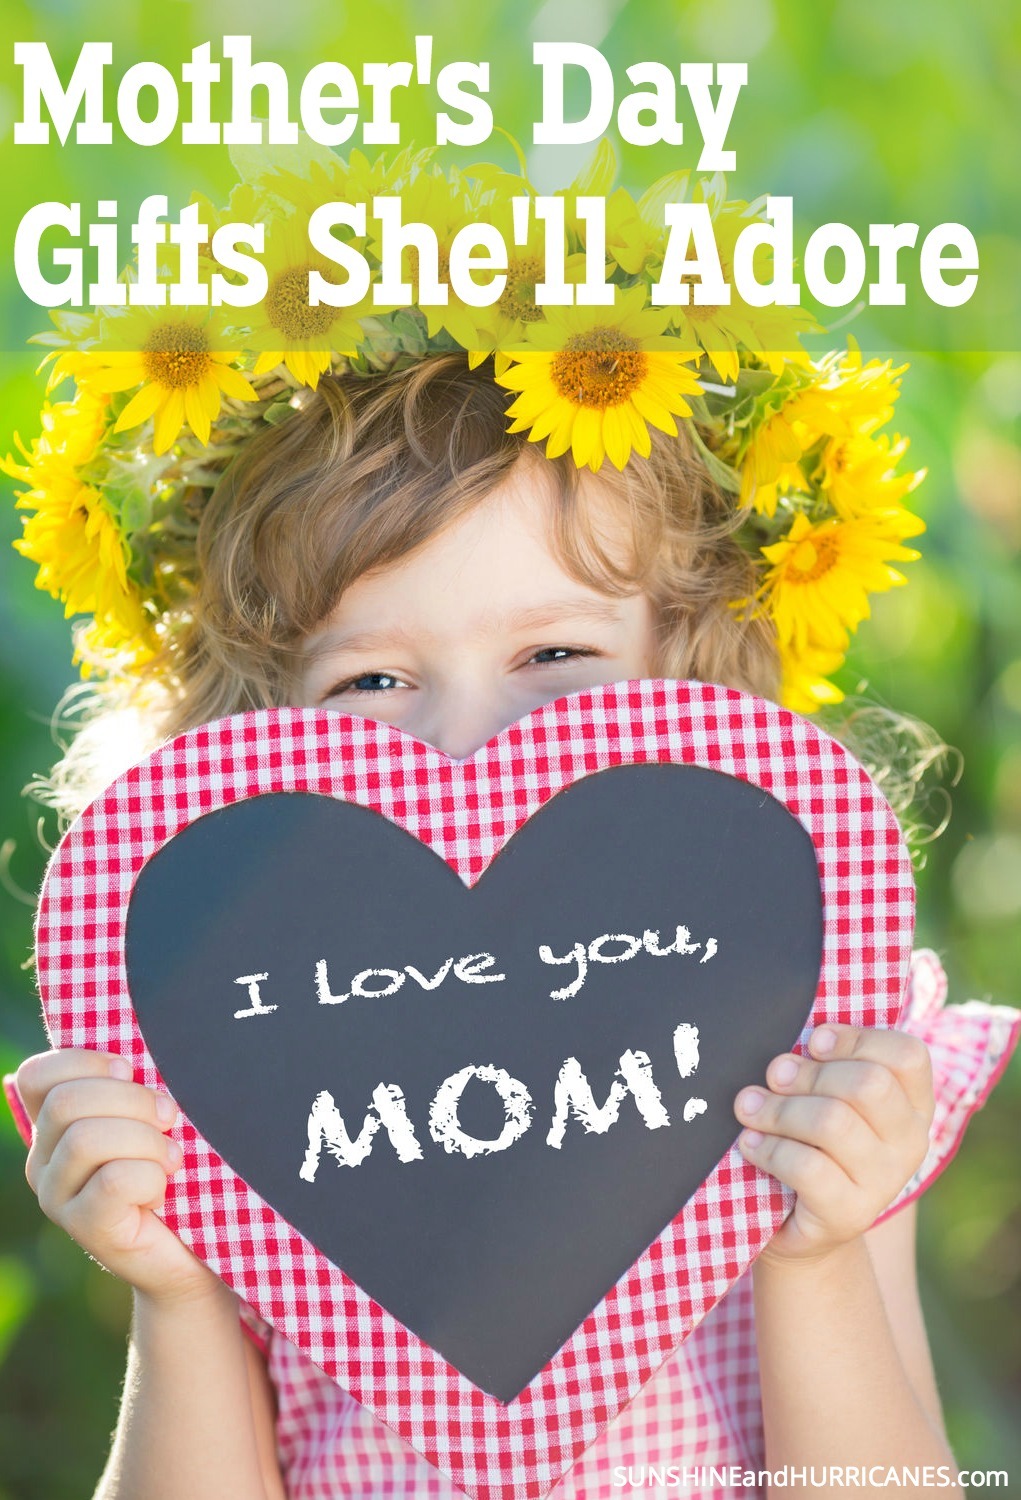 Looking for the perfect Mother's Day gift? Maybe you just want to give your husband and kids a few hints as to something you might like.?? We've got ideas you will love to give AND love to receive. Unique, heartfelt and fun there is something for everyone. Mother's Day Gifts She'll Adore. SunshineandHurricanes.com